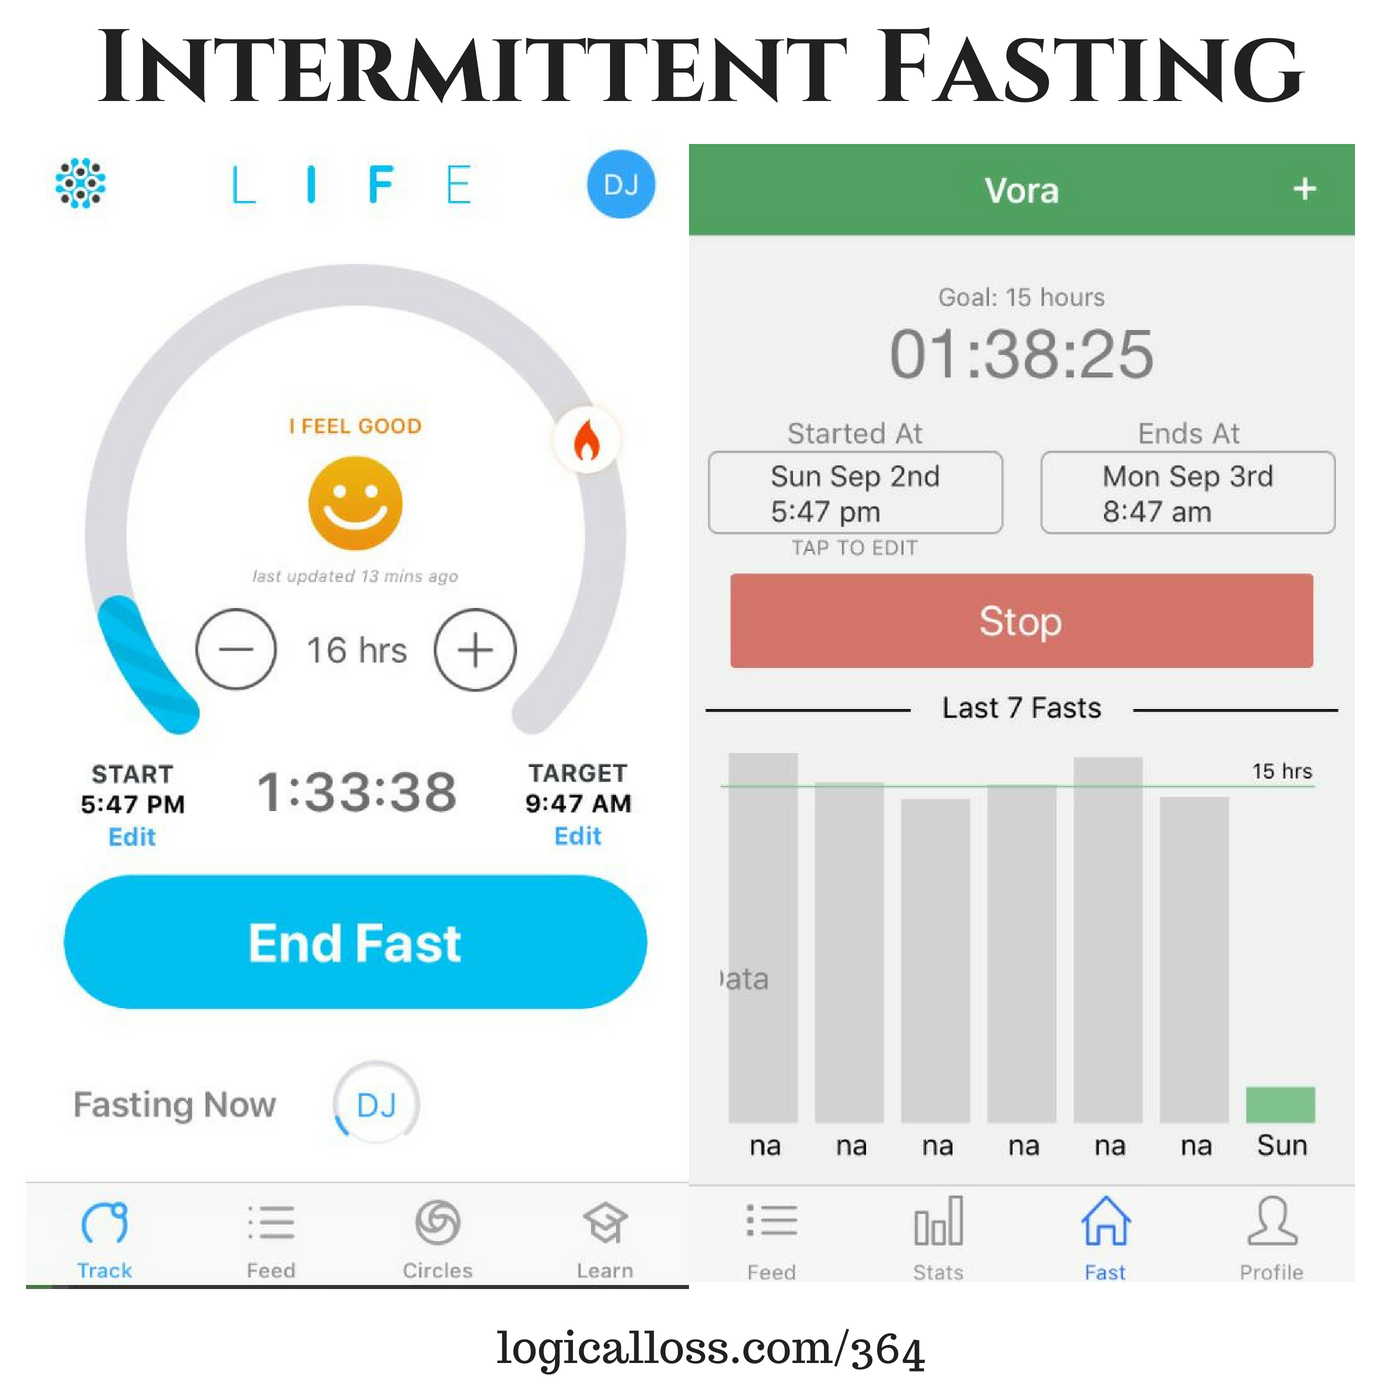 What's The Deal With Intermittent Fasting